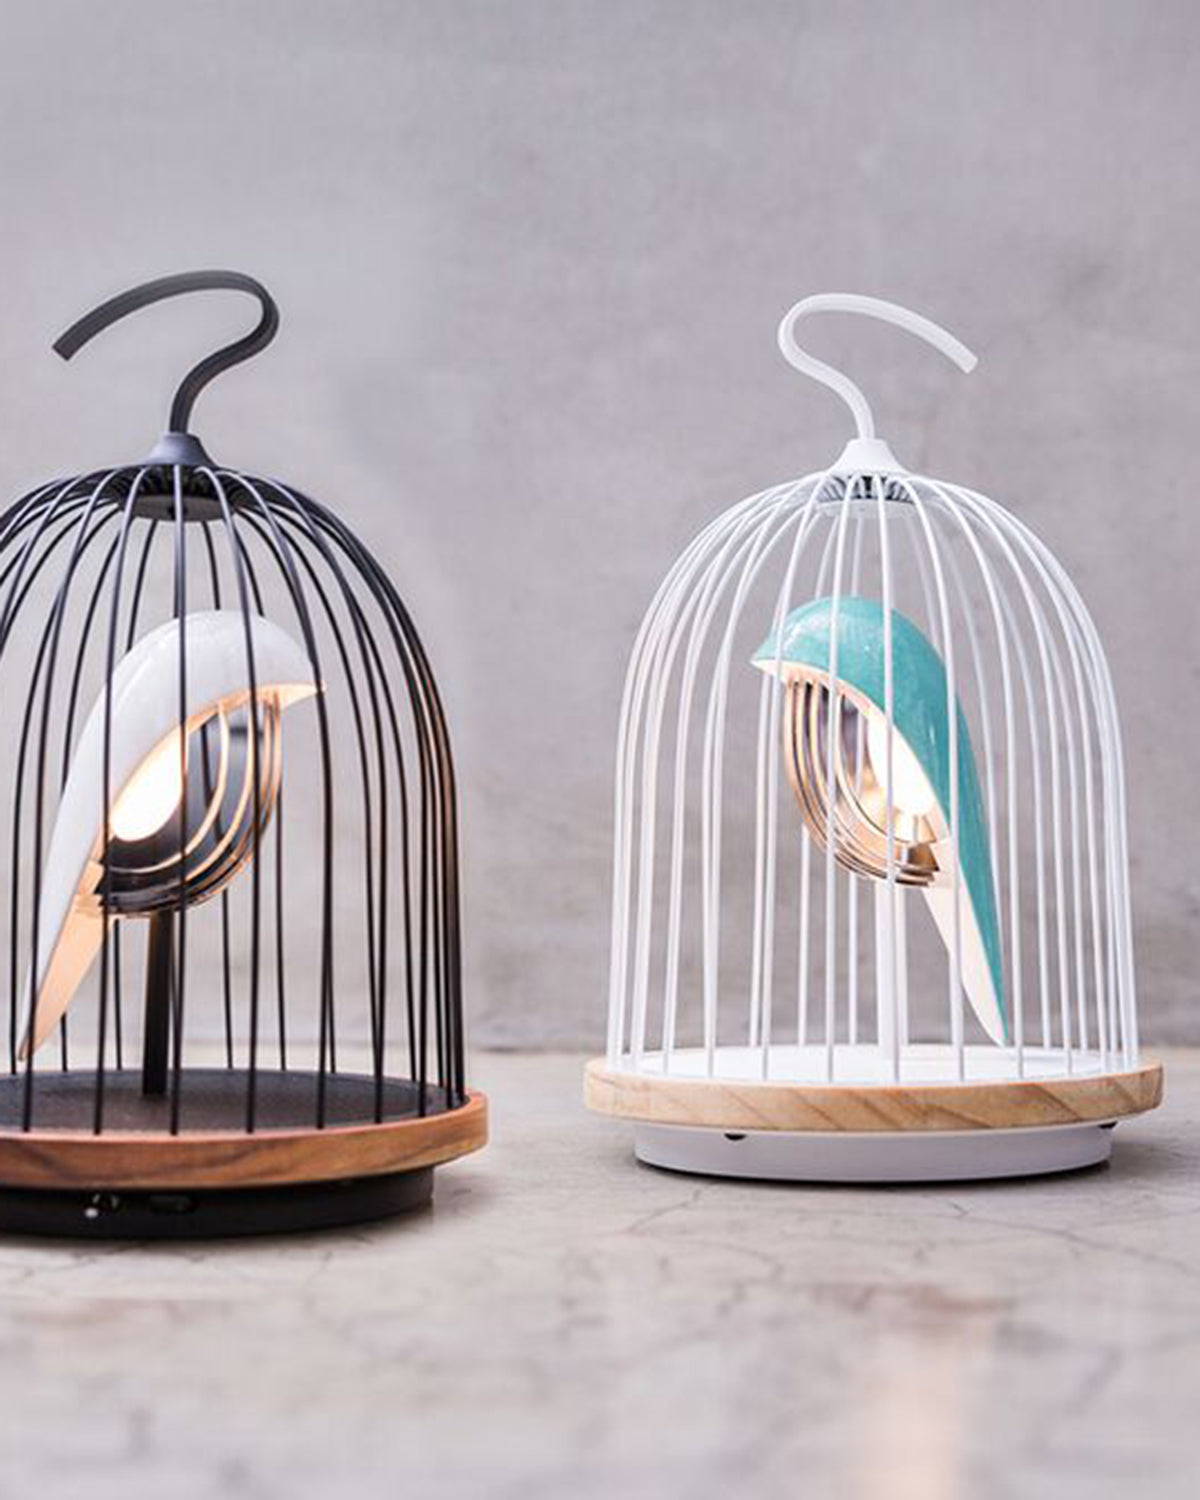 Daqi Bluetooth Speaker and Light white porcelain bird gold accents black cage and walnut color speaker base